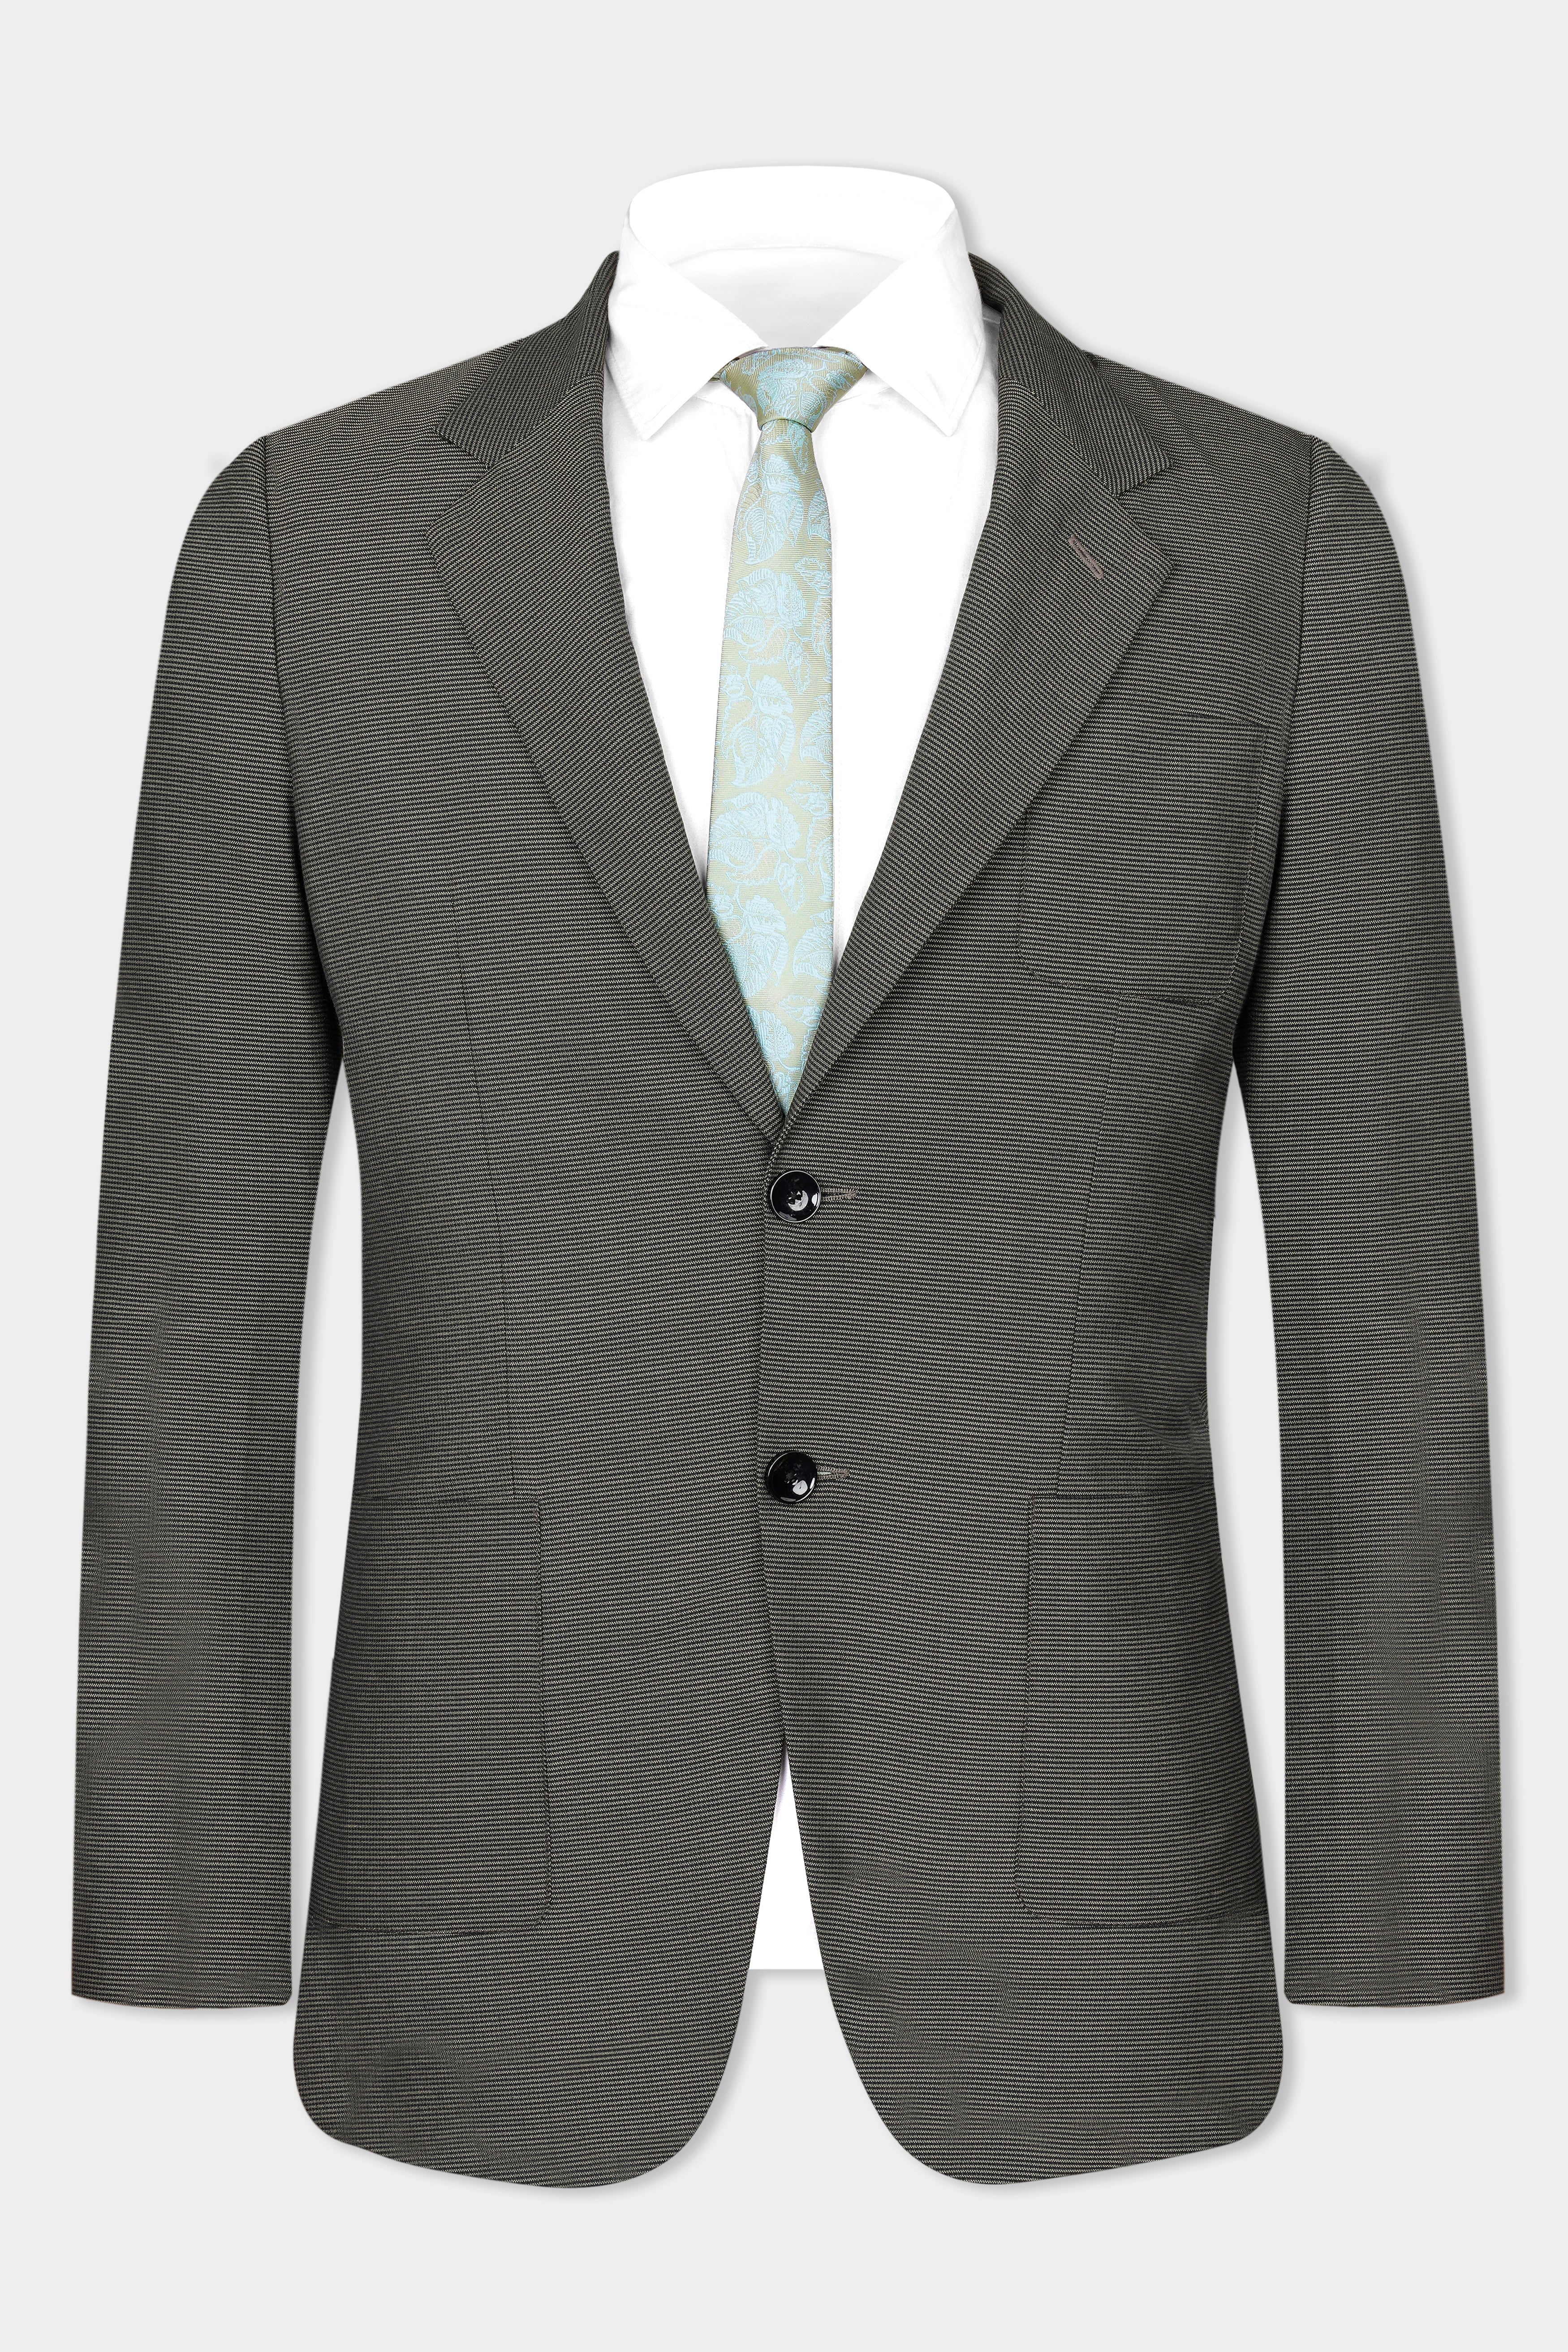 Dune Gray Woolrich Single Breasted Sports Blazer BL3031-SB-PP-36, BL3031-SB-PP-38, BL3031-SB-PP-40, BL3031-SB-PP-42, BL3031-SB-PP-44, BL3031-SB-PP-46, BL3031-SB-PP-48, BL3031-SB-PP-50, BL3031-SB-PP-52, BL3031-SB-PP-54, BL3031-SB-PP-56, BL3031-SB-PP-58, BL3031-SB-PP-60